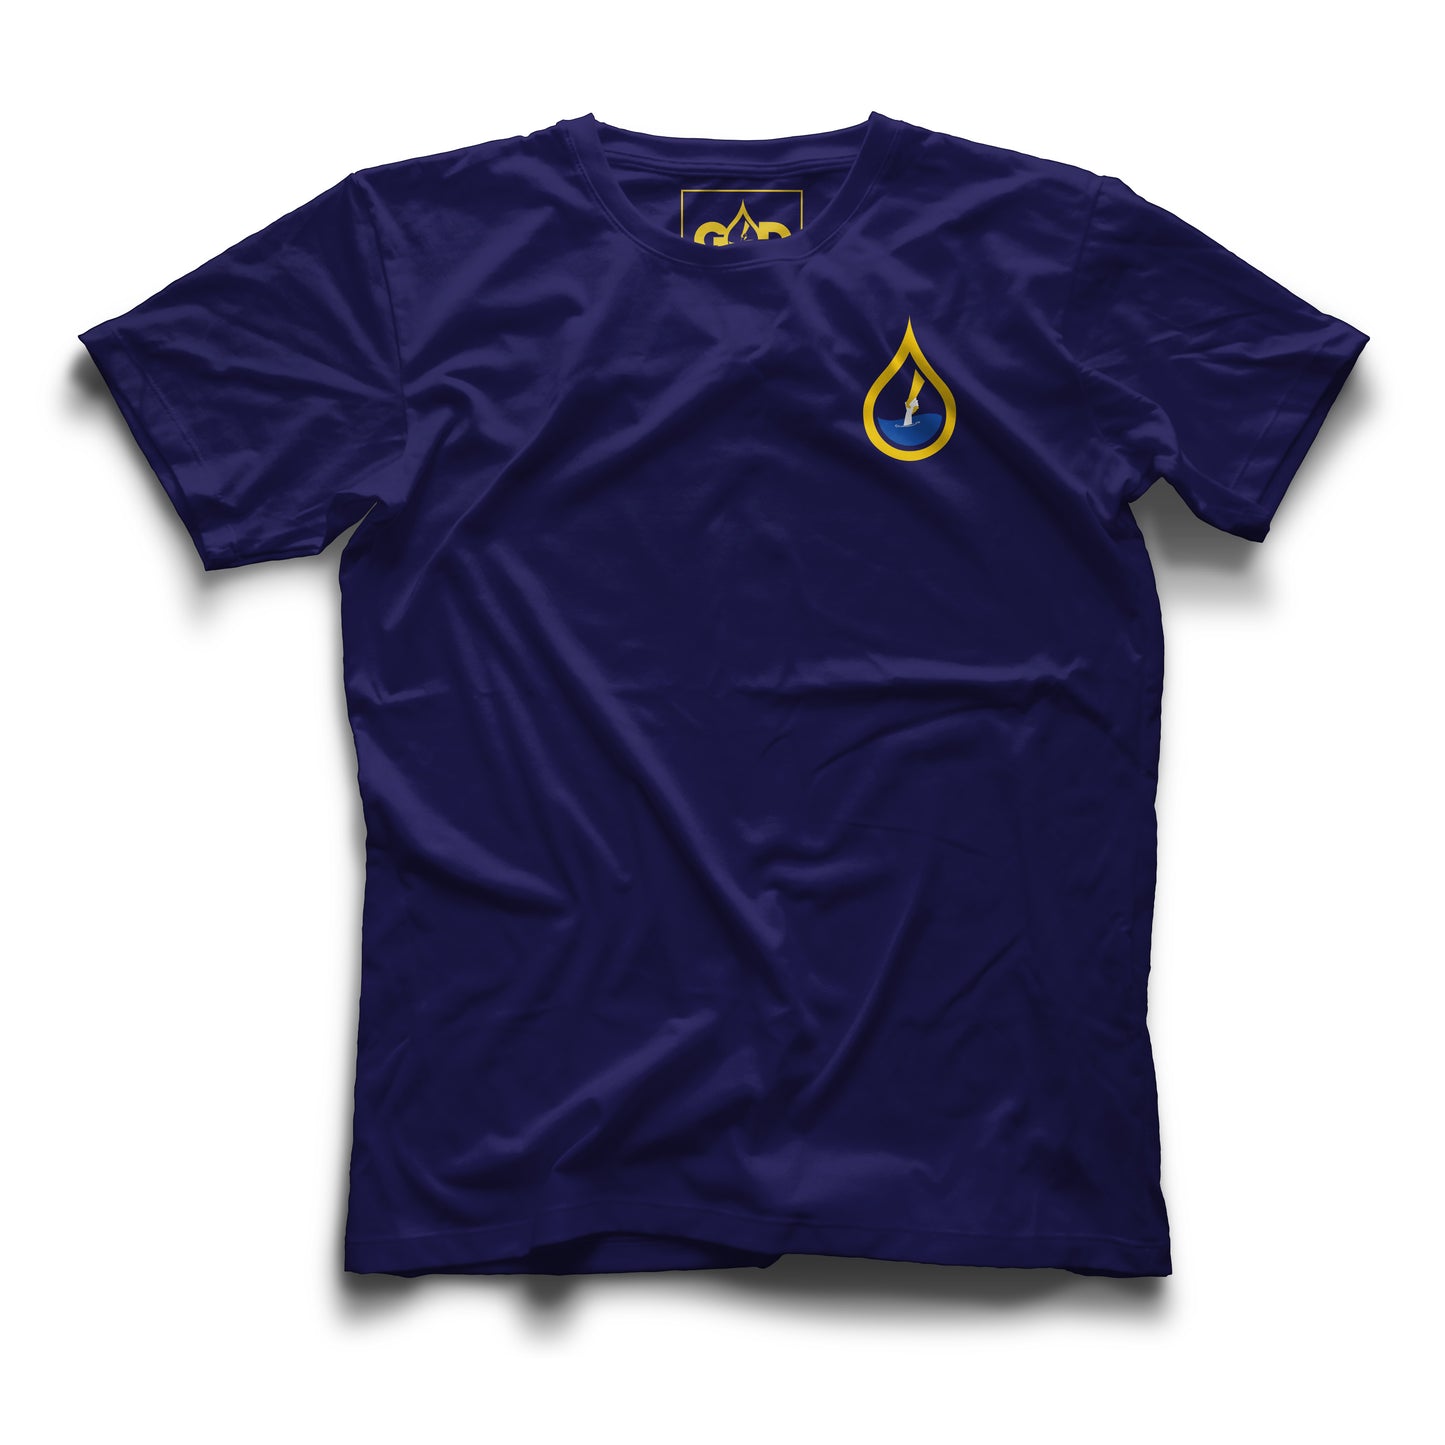 Water is Gold Shirt